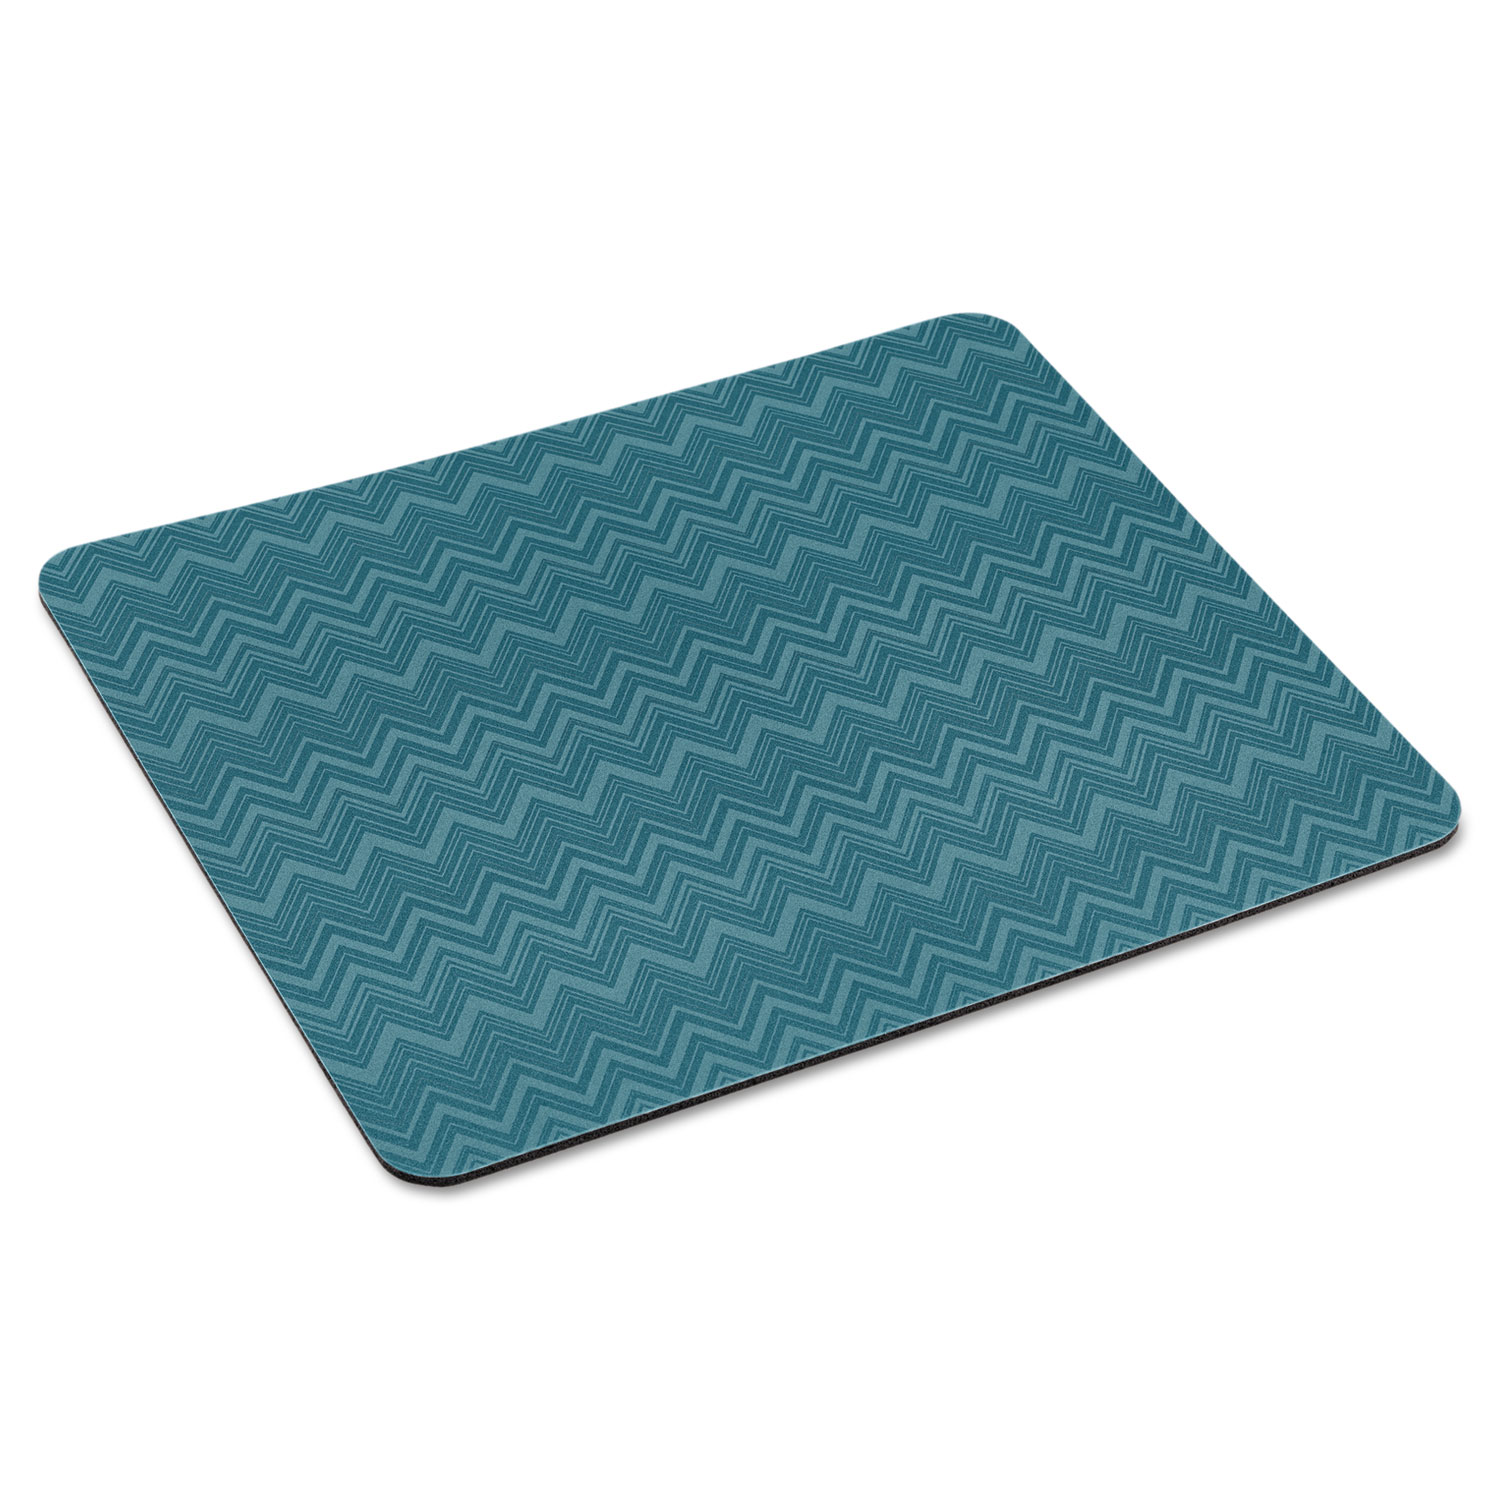 Mouse Pad with Precise Mousing Surface, 9 x 8 x 1/5, Chevron Design